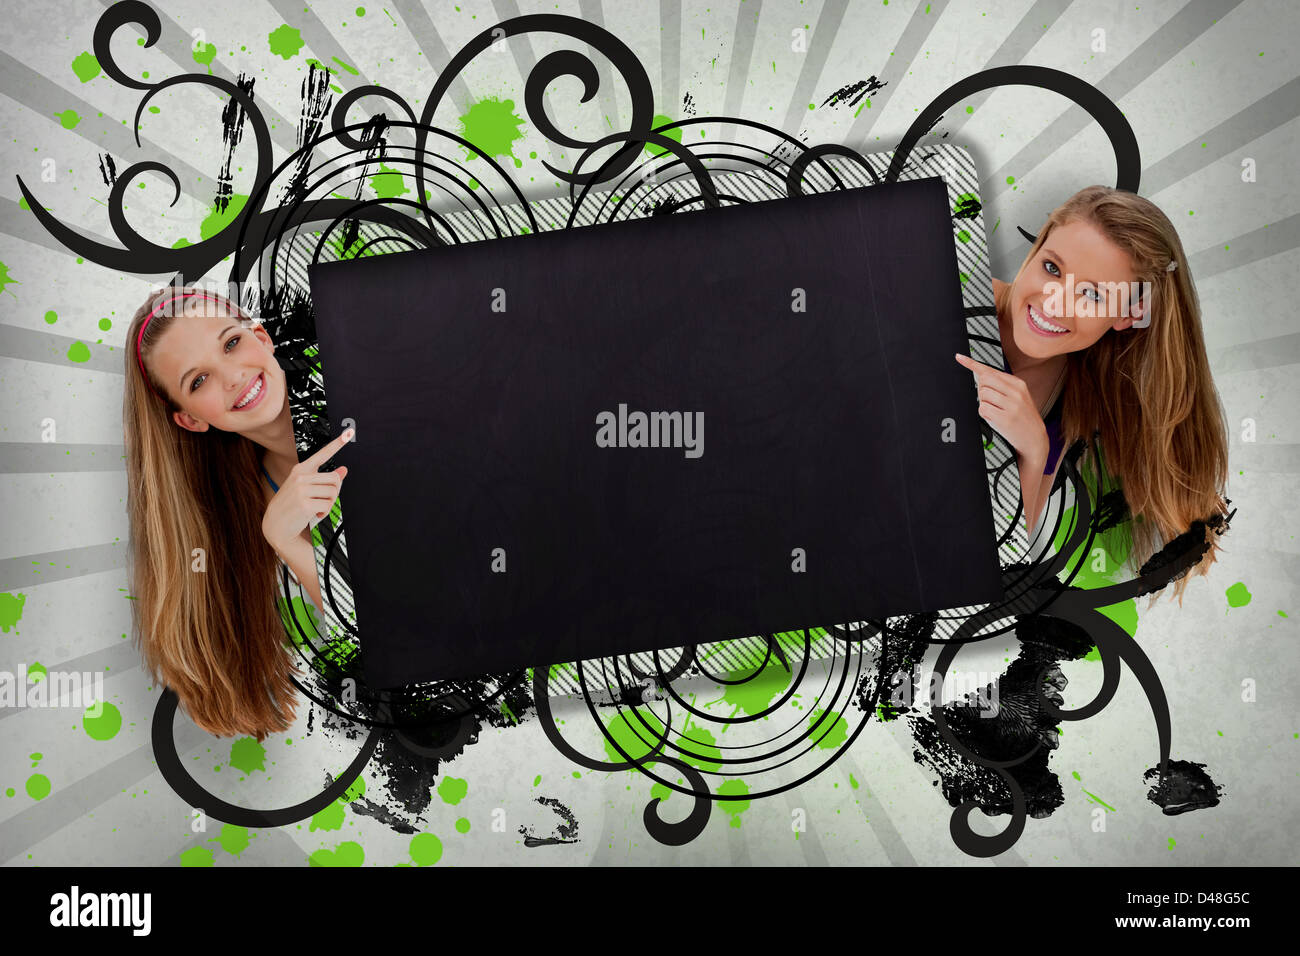 Girls pointing to black copy space with artistic black swirls Stock Photo